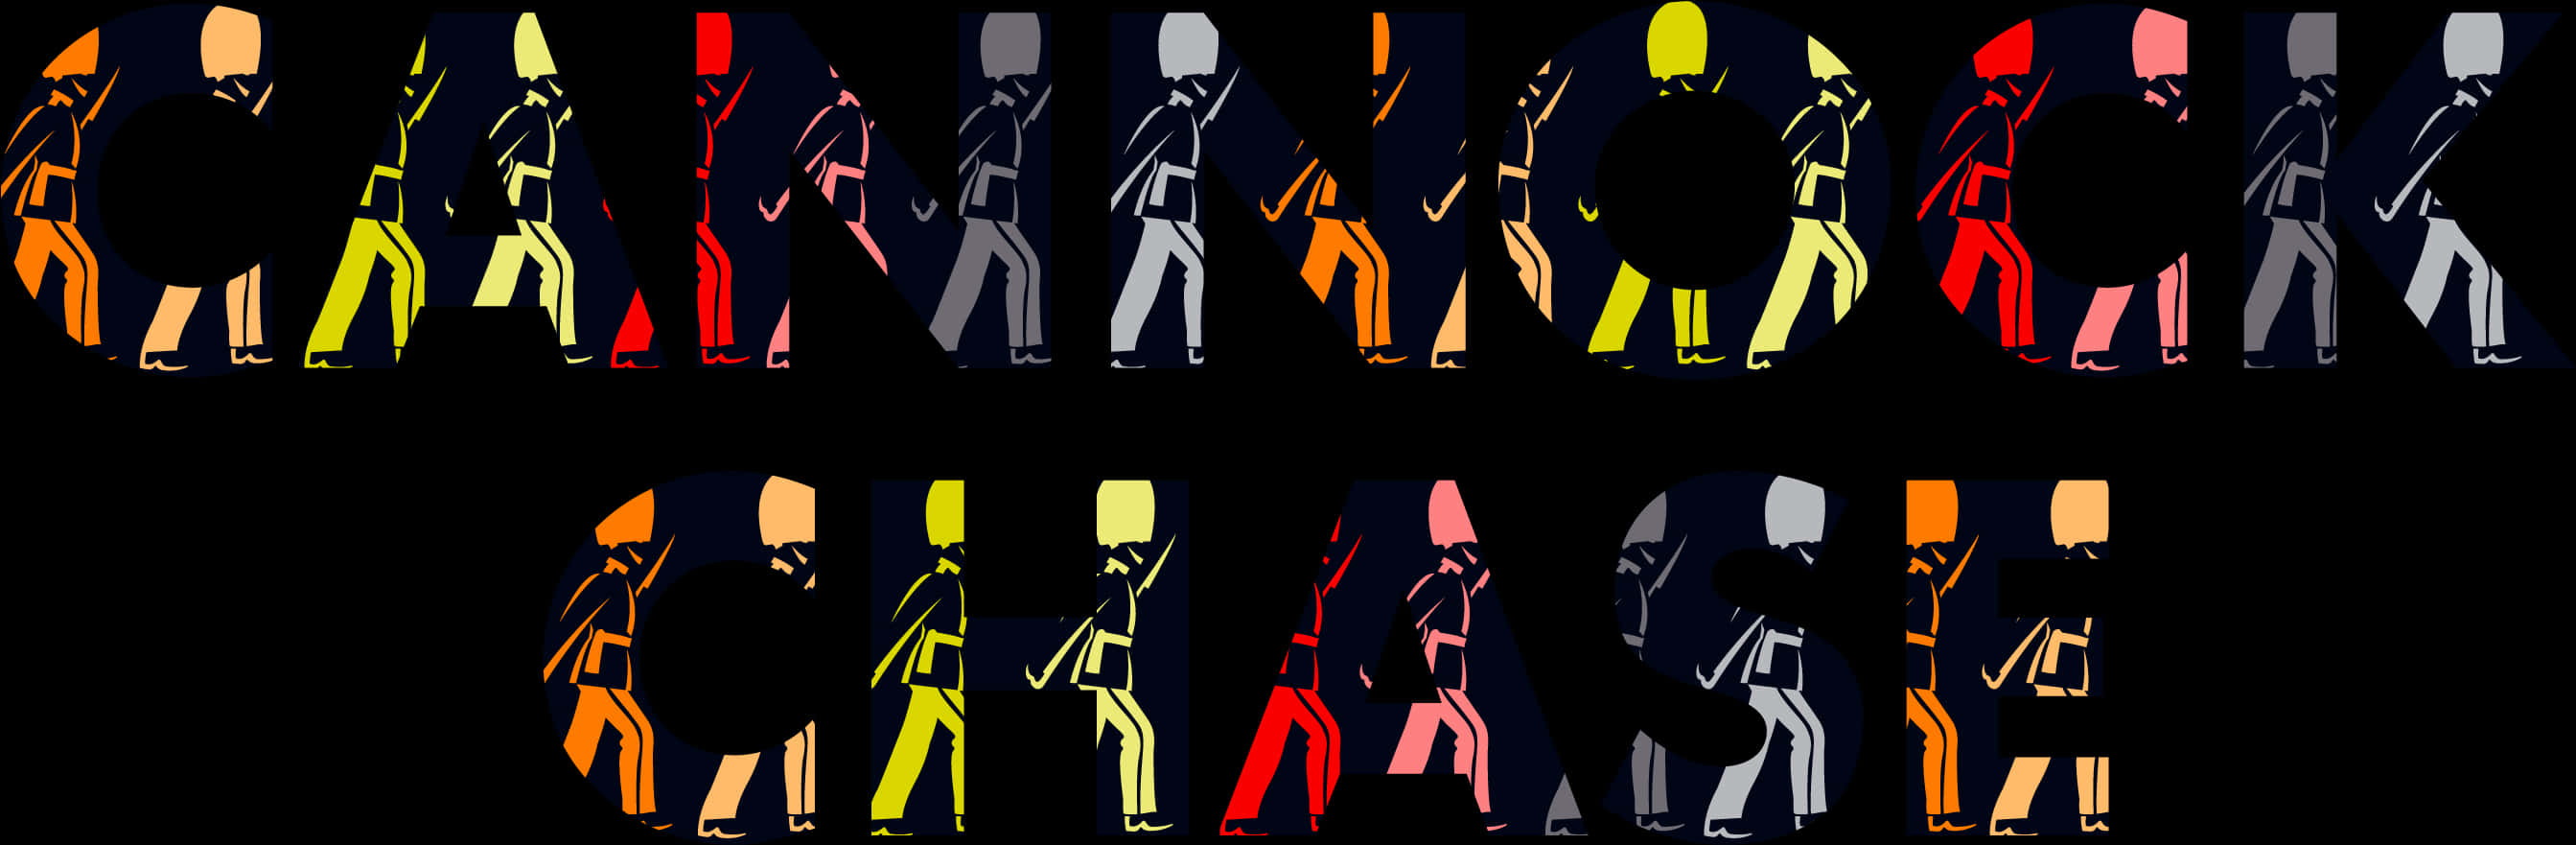 Colorful Silhouettes Chase Logo